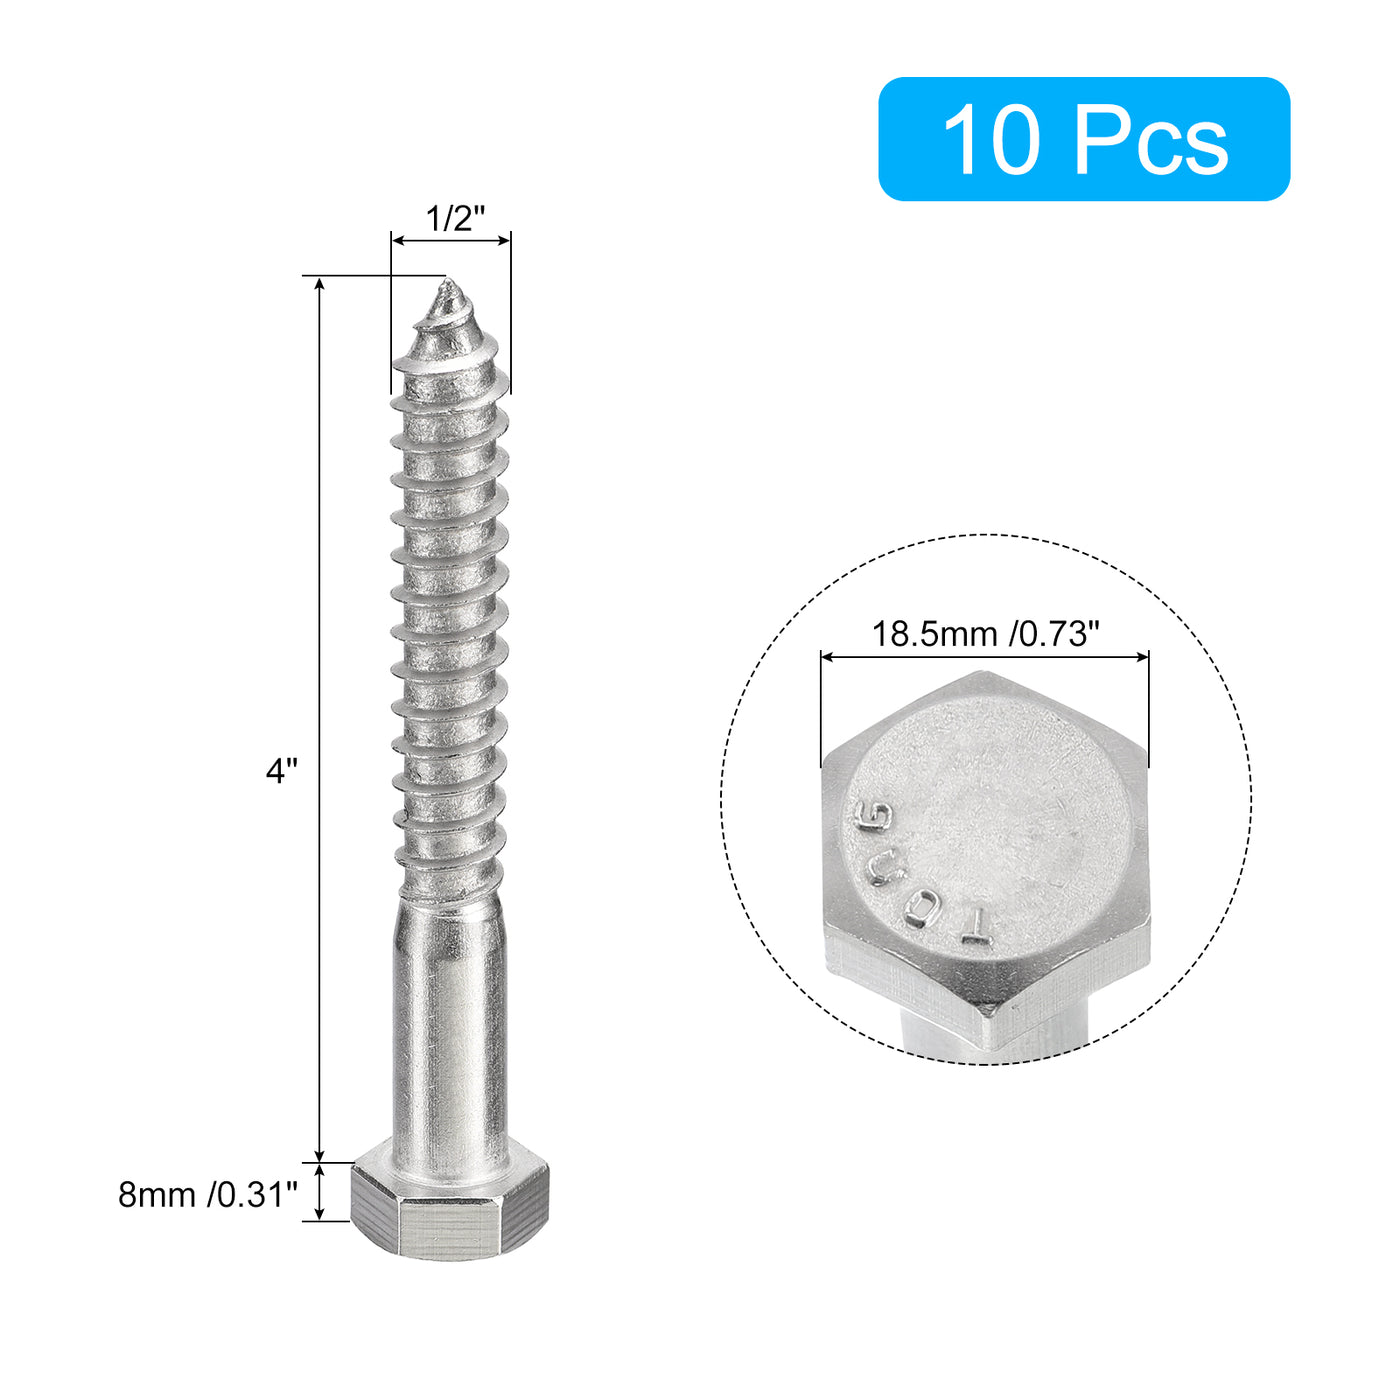 uxcell Uxcell Hex Head Lag Screws Bolts, 10pcs 1/2" x 4" 304 Stainless Steel Wood Screws